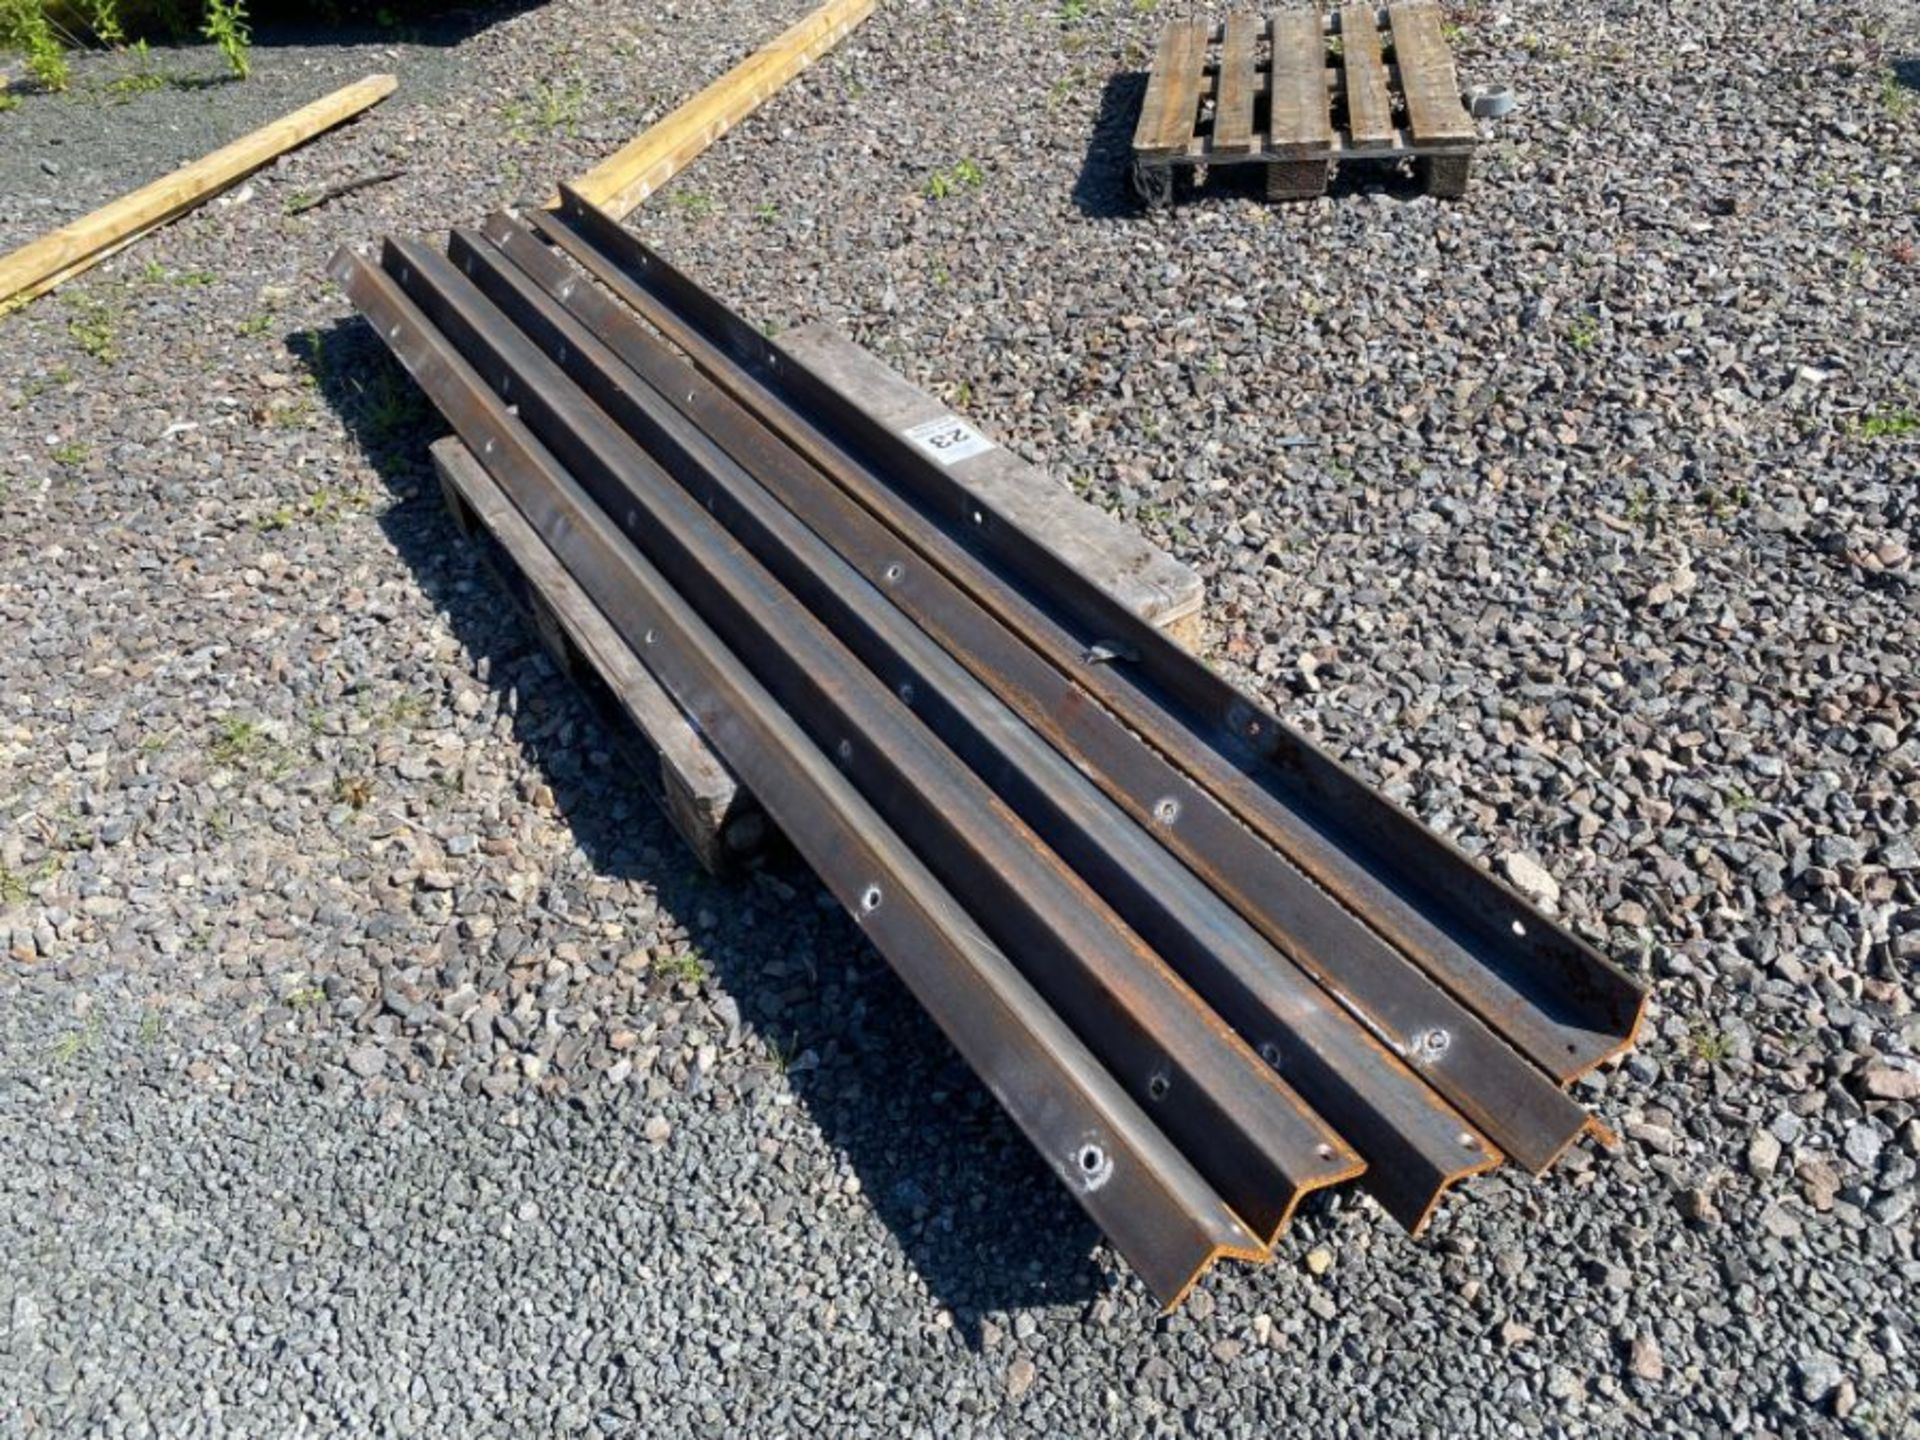 5 X LENGTHS OF 4 X 3” ANGLE IRON 10MM THICK (LENGTHS 118” - 121”) (HAMMER VAT ON THIS ITEM)